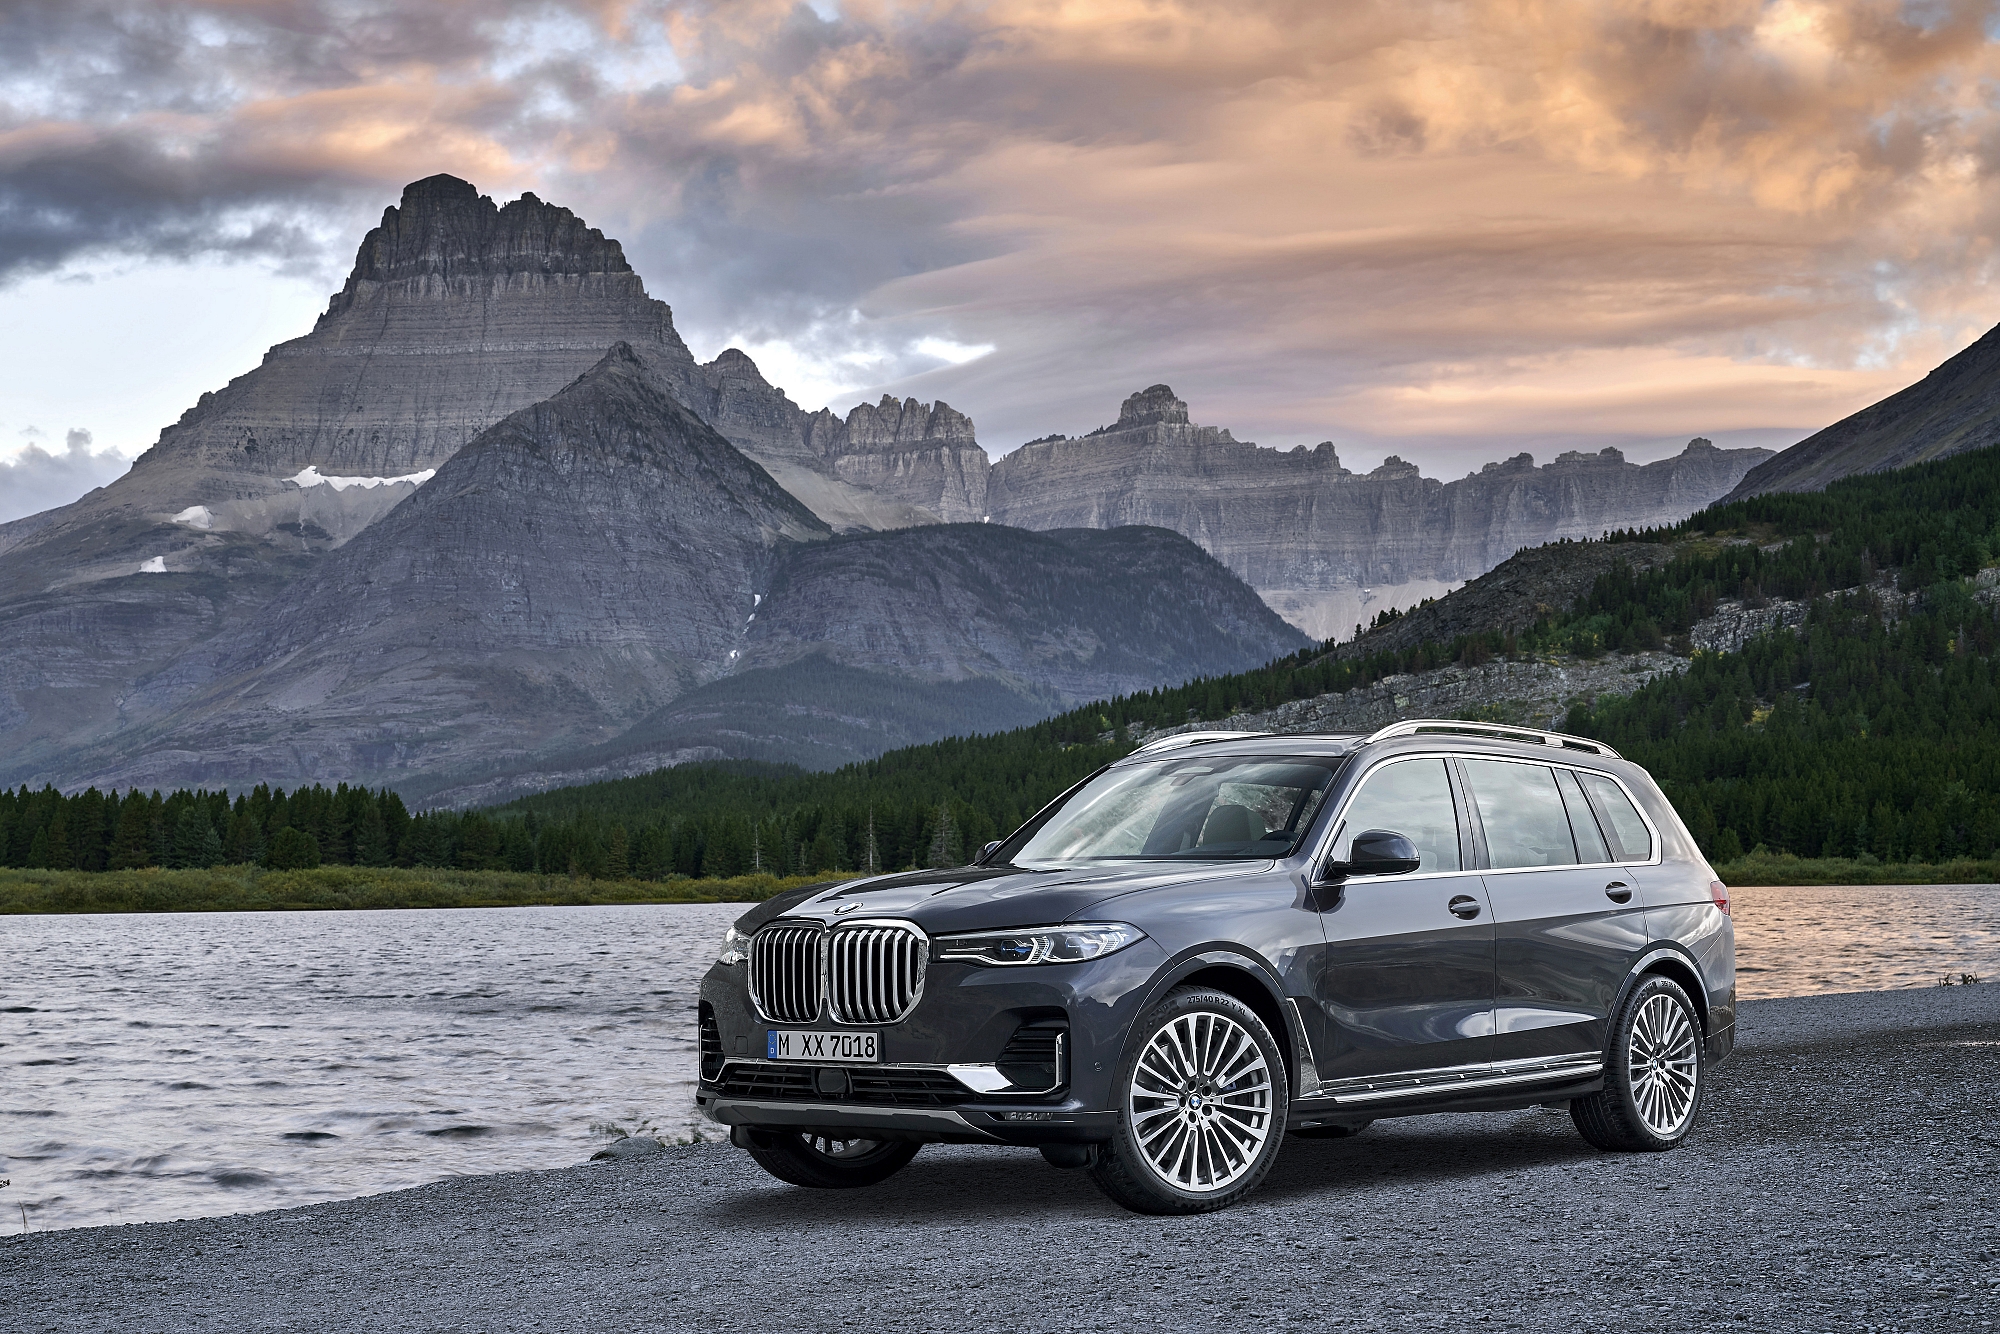 The First Bmw X7 The Biggest Bmw Ever Made Life Beyond Sport